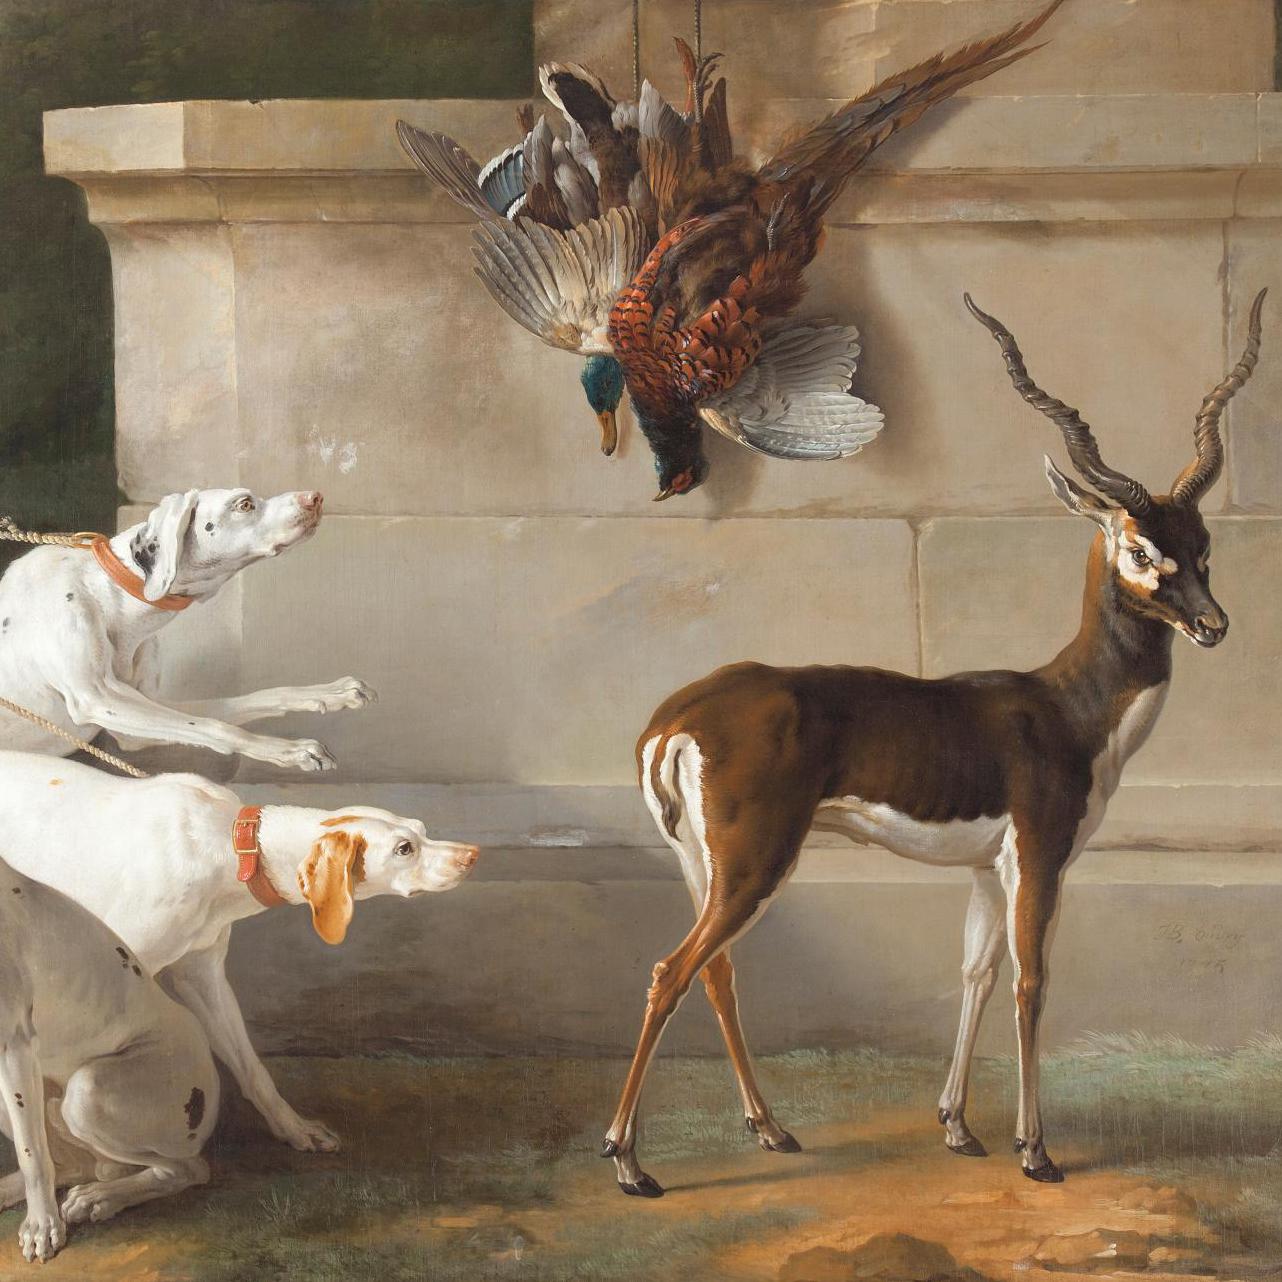 Royal Animals and Political Beasts During the Enlightenment - Analyses